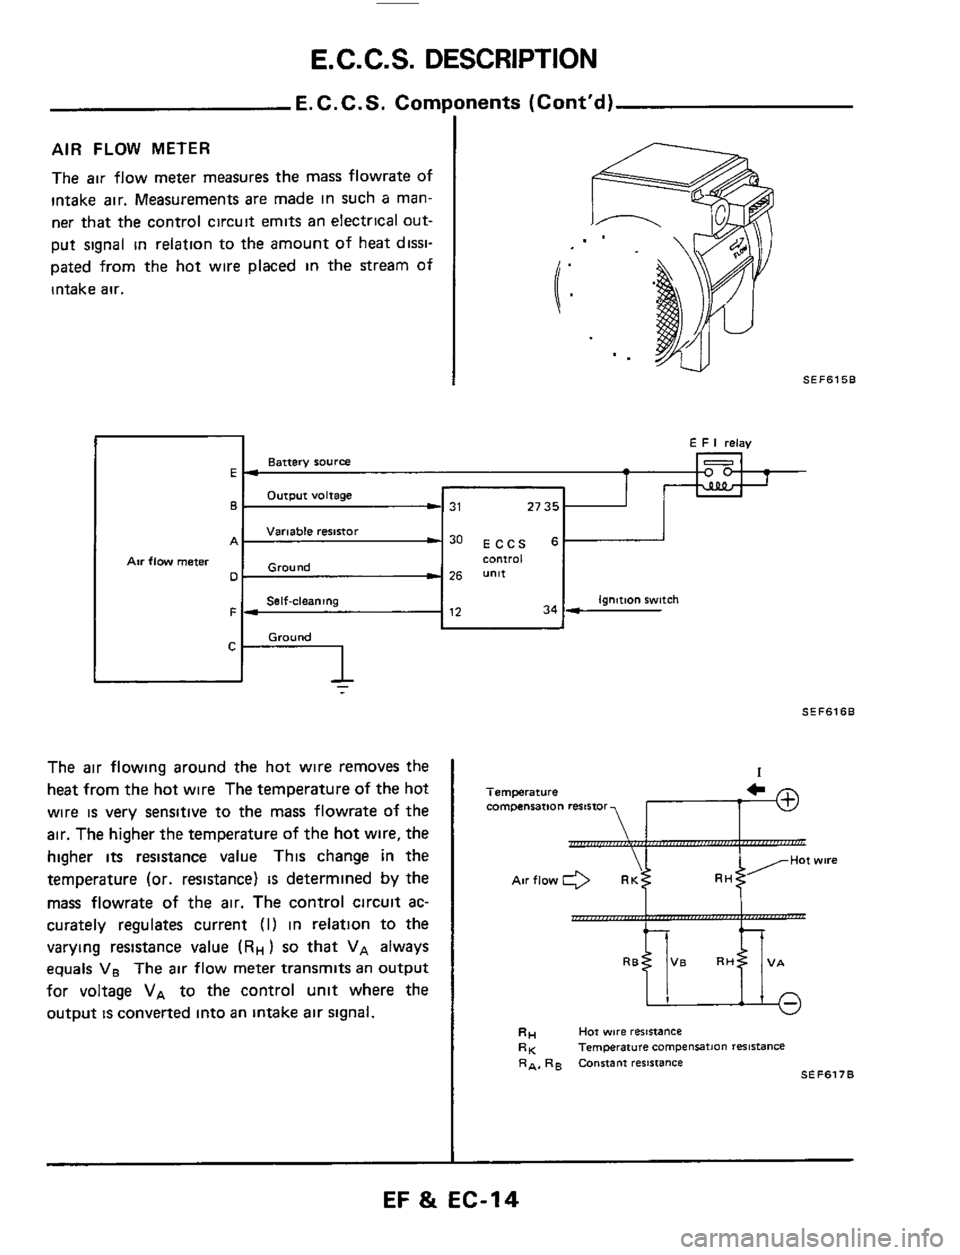 NISSAN 300ZX 1984 Z31 Engine Fuel And Emission Control System Workshop Manual E.C.C.S. DESCRIPTION 
E.C.C.S. Components  (Contd) 
A 
Air flow meter 0. 
C 
AIR FLOW METER 
The air flow meter  measures  the mass  flowrate  of 
intake  air. Measurements  are made  in such 
a man-